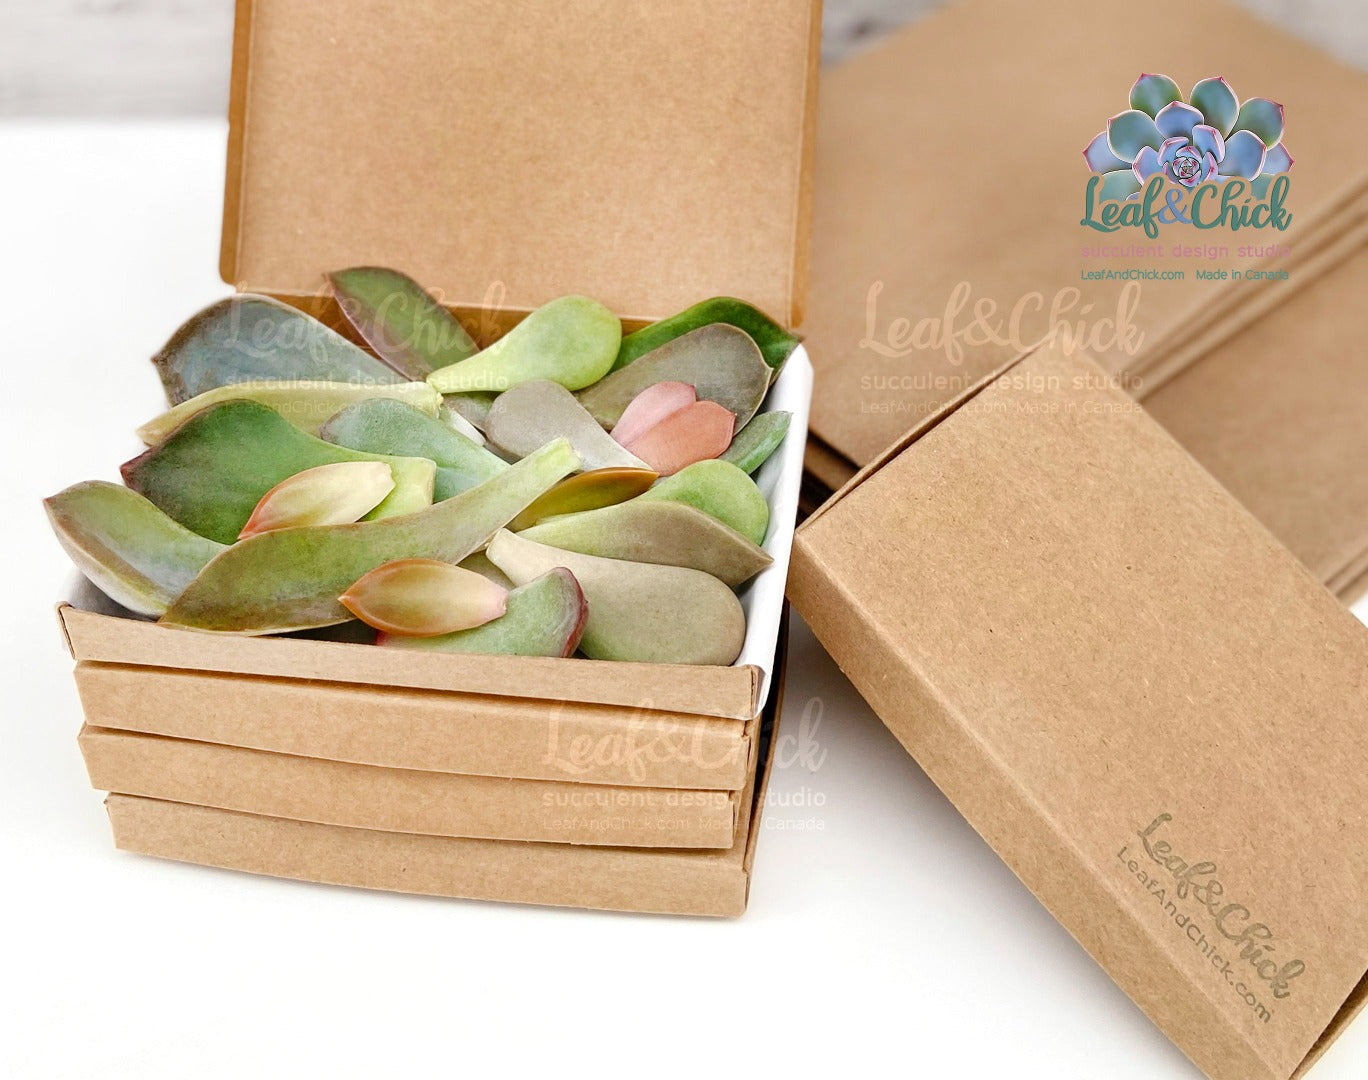 Leaf & Chick uses eco friendly, recyclable packaging